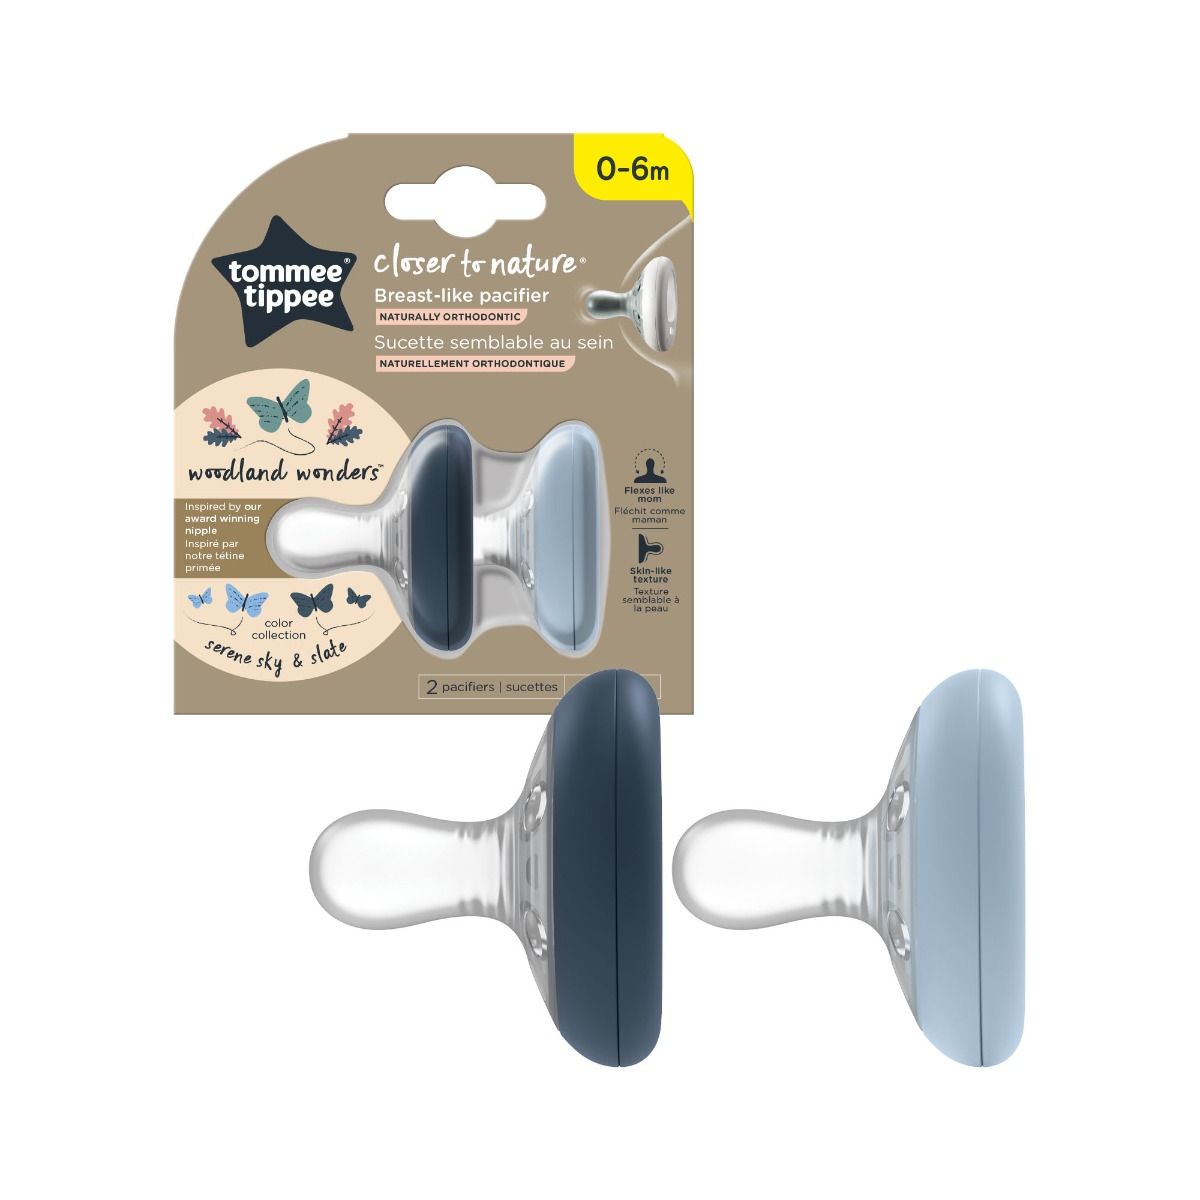 Suzeta Closer to Nature, 0-6 luni Breast Like Pacifier Gri inchis/Gri deschis x2buc, TOMMEE TIPPEE TT0353